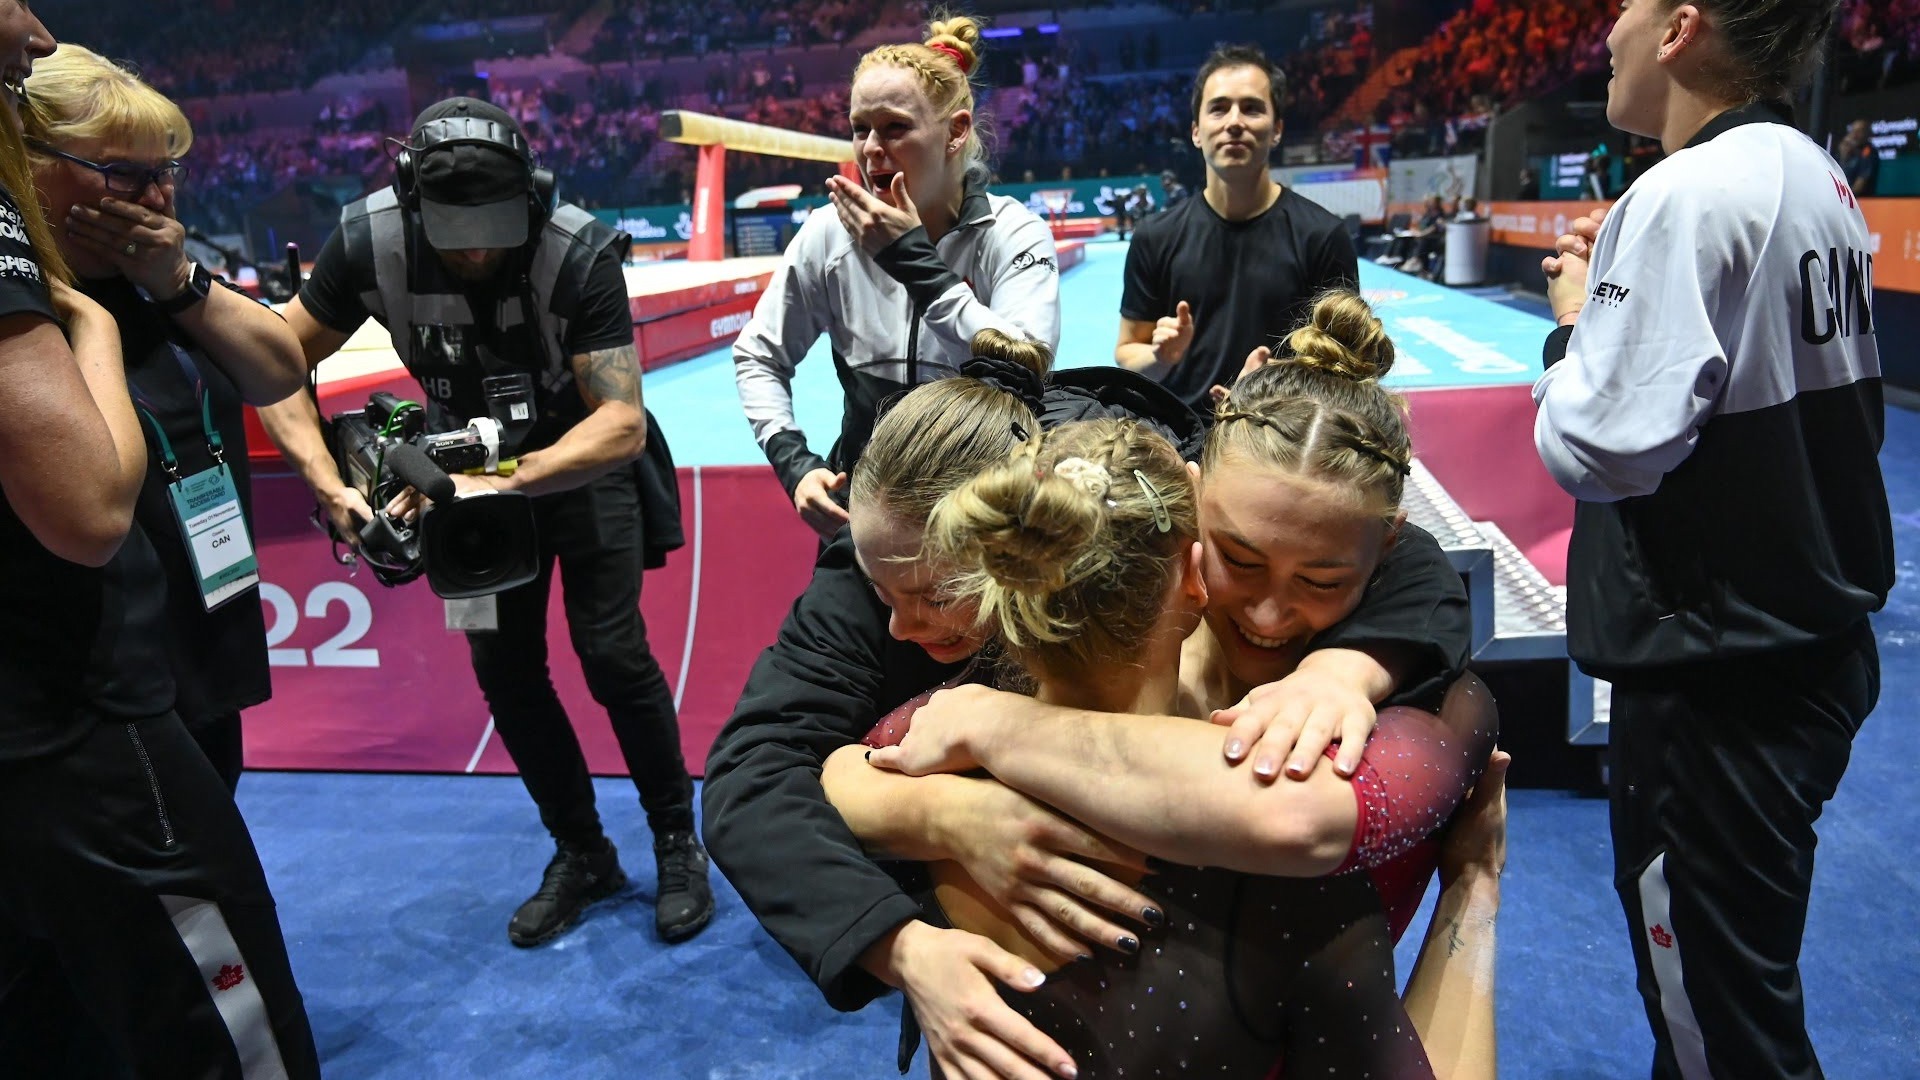 The Canada women's team celebrates after winning bronze during the team final at the 2022 World Gymnastics Championships.